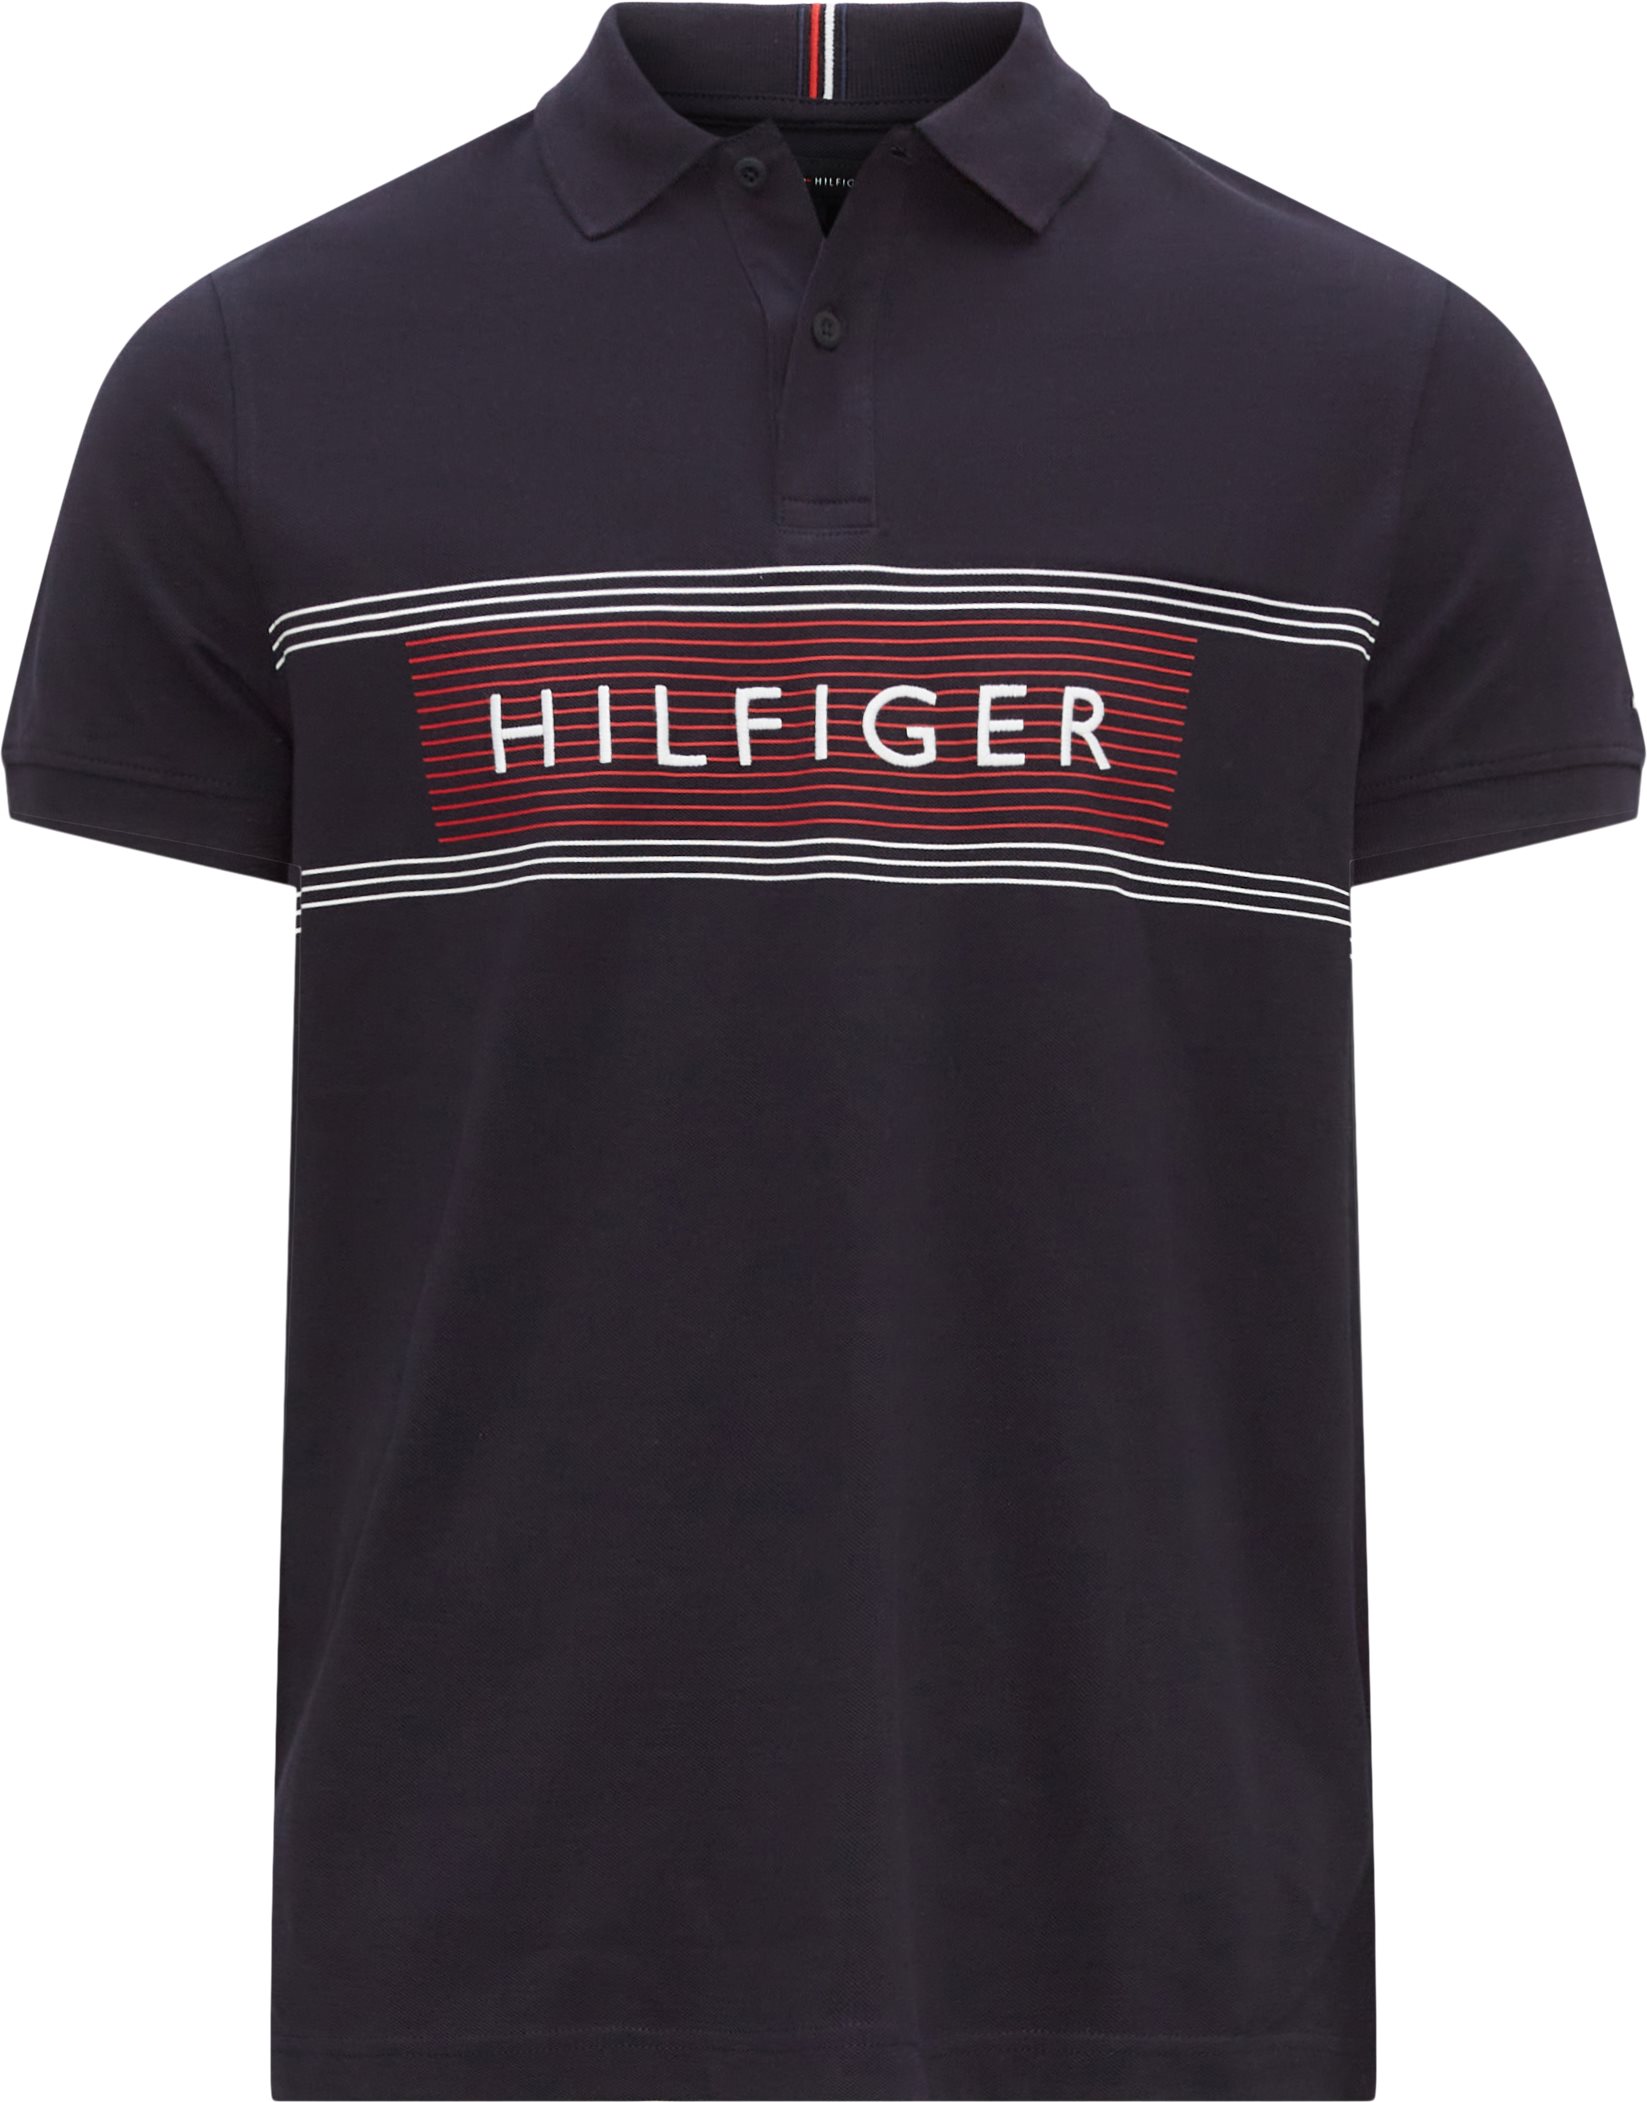 T-shirts Hilfiger 30781 NAVY EUR from REG Tommy RWB 53 CHEST POLO